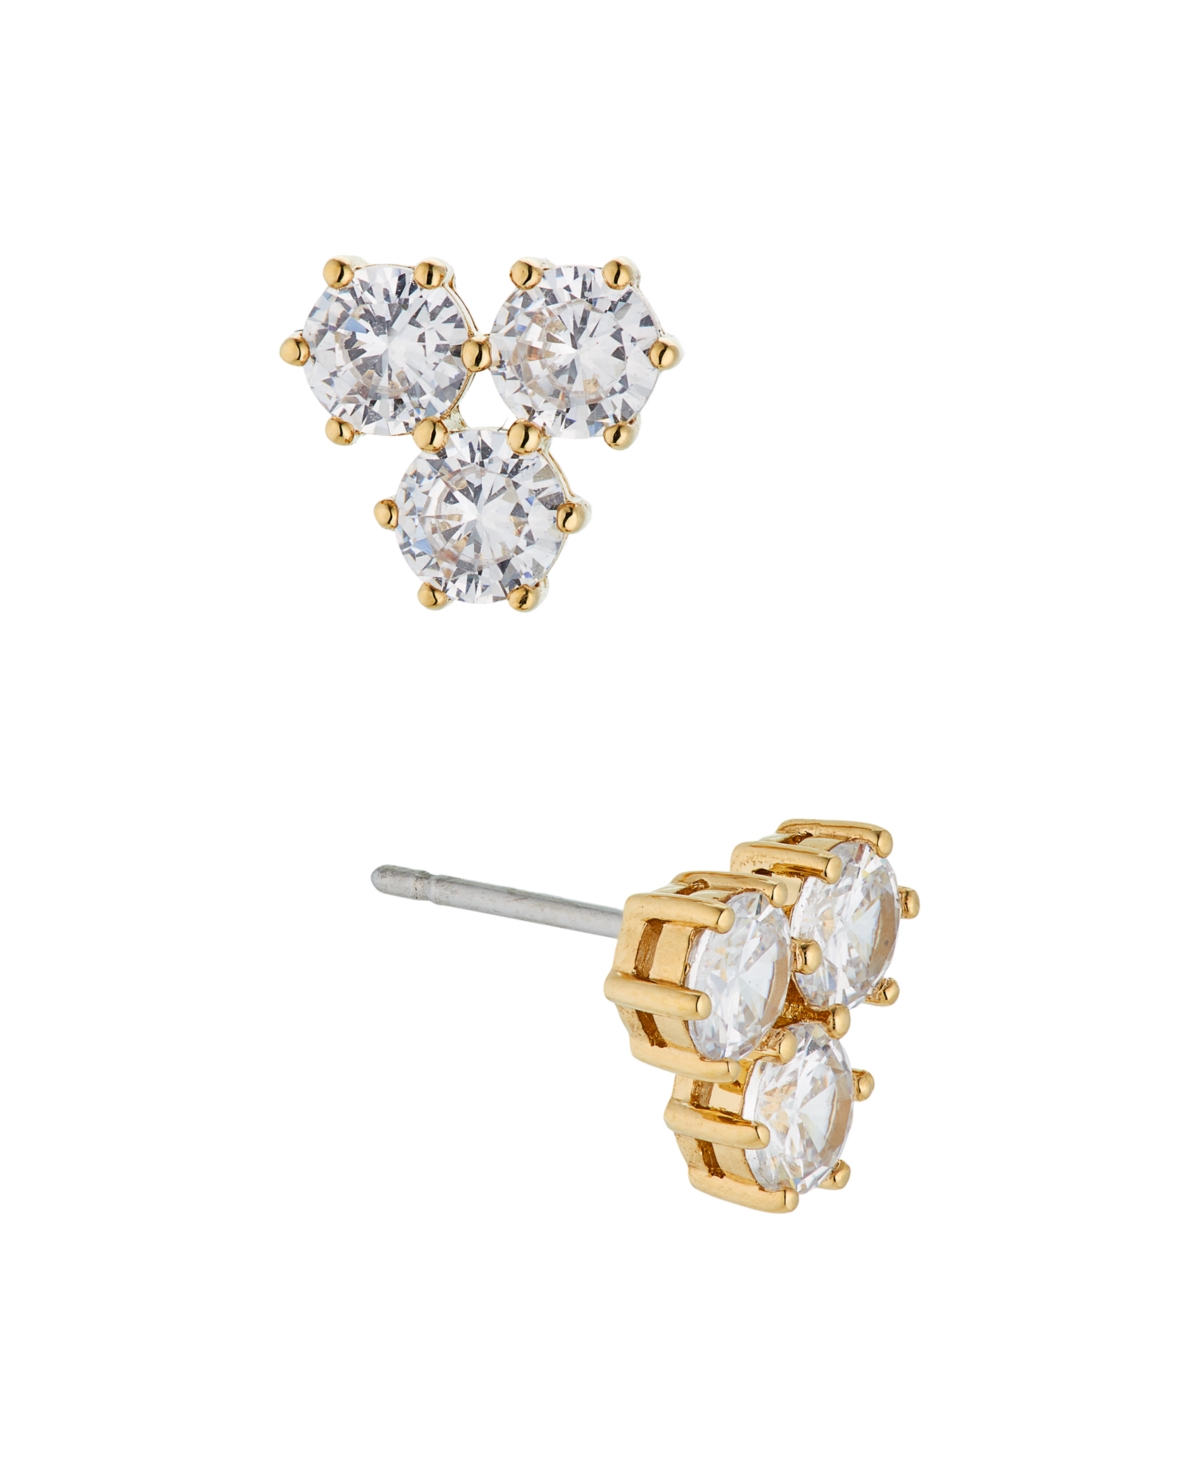 Triple Stone Cubic Zirconia Stud Earrings, Created for Macy's - Gold